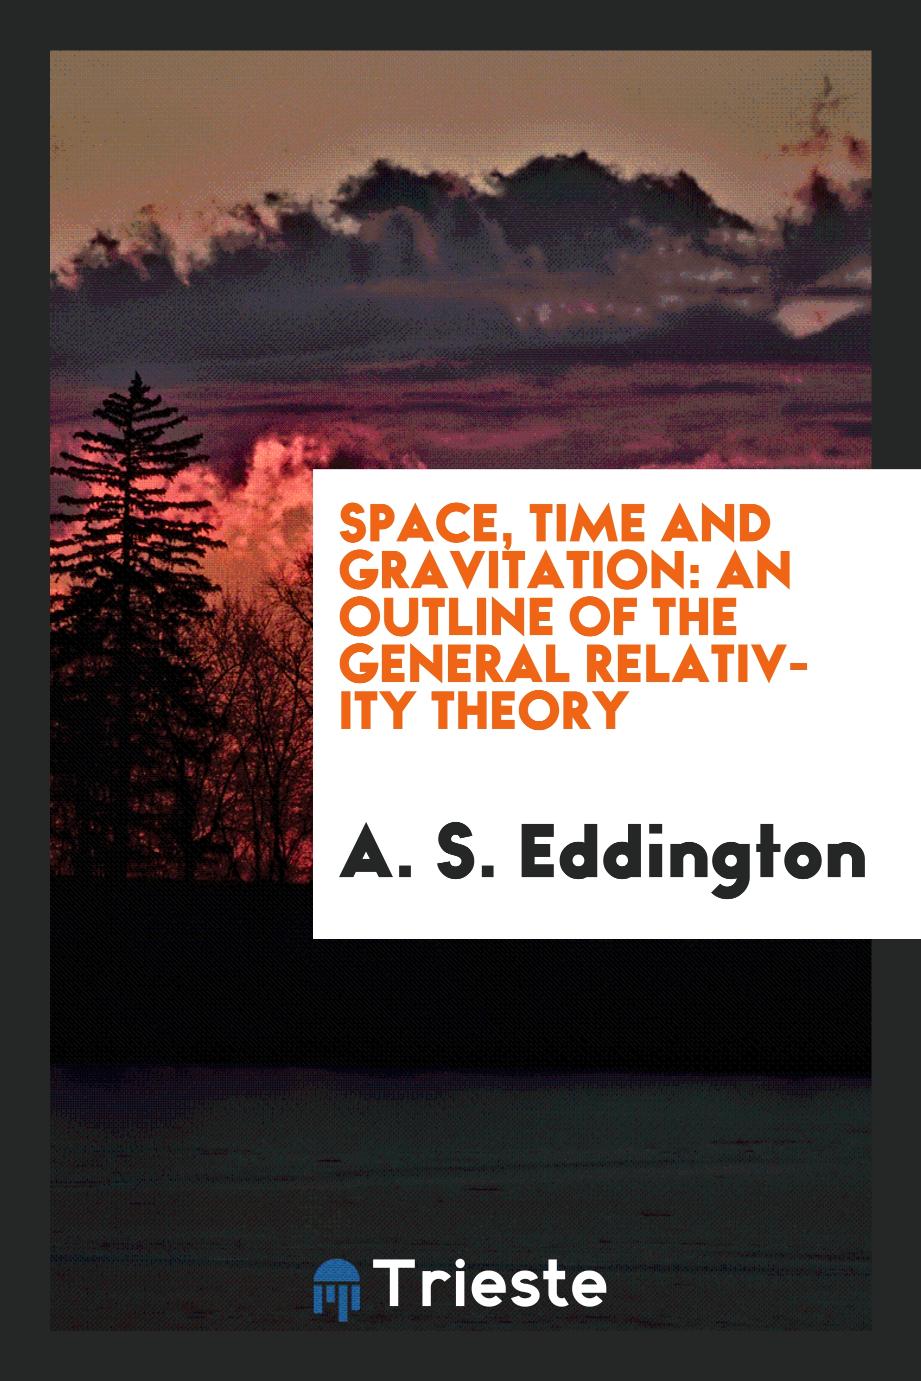 Space, time and gravitation: an outline of the general relativity theory